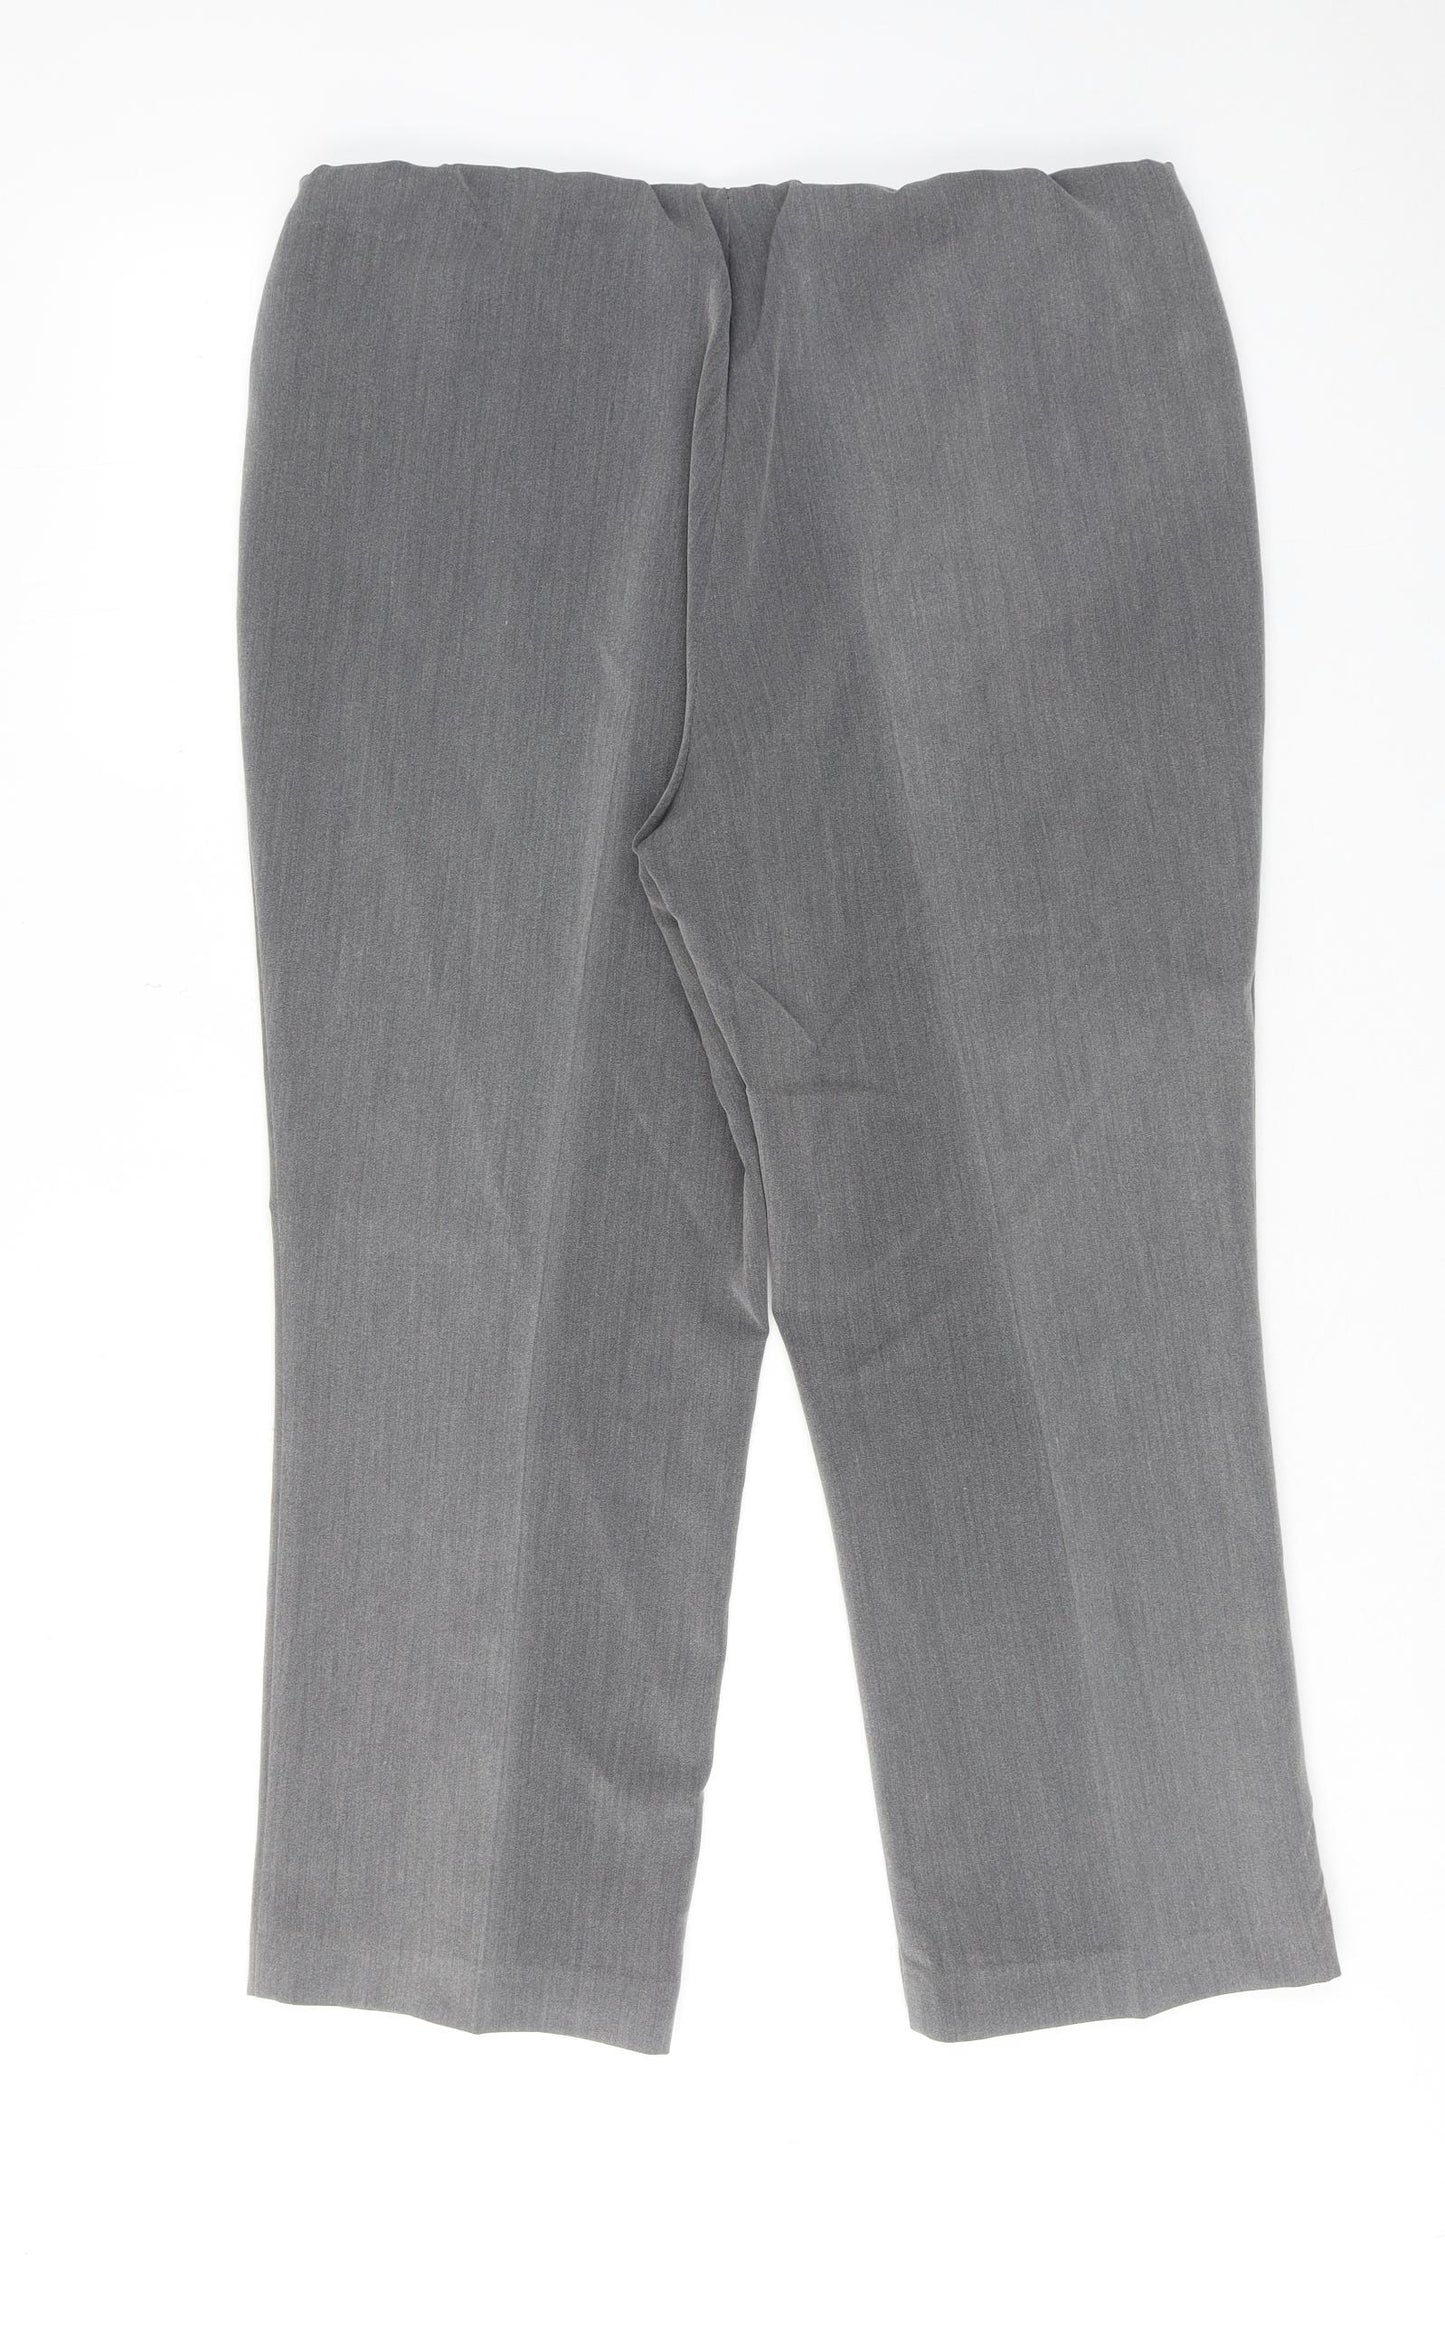 Bonmarché Womens Grey Polyester Trousers Size 14 Regular